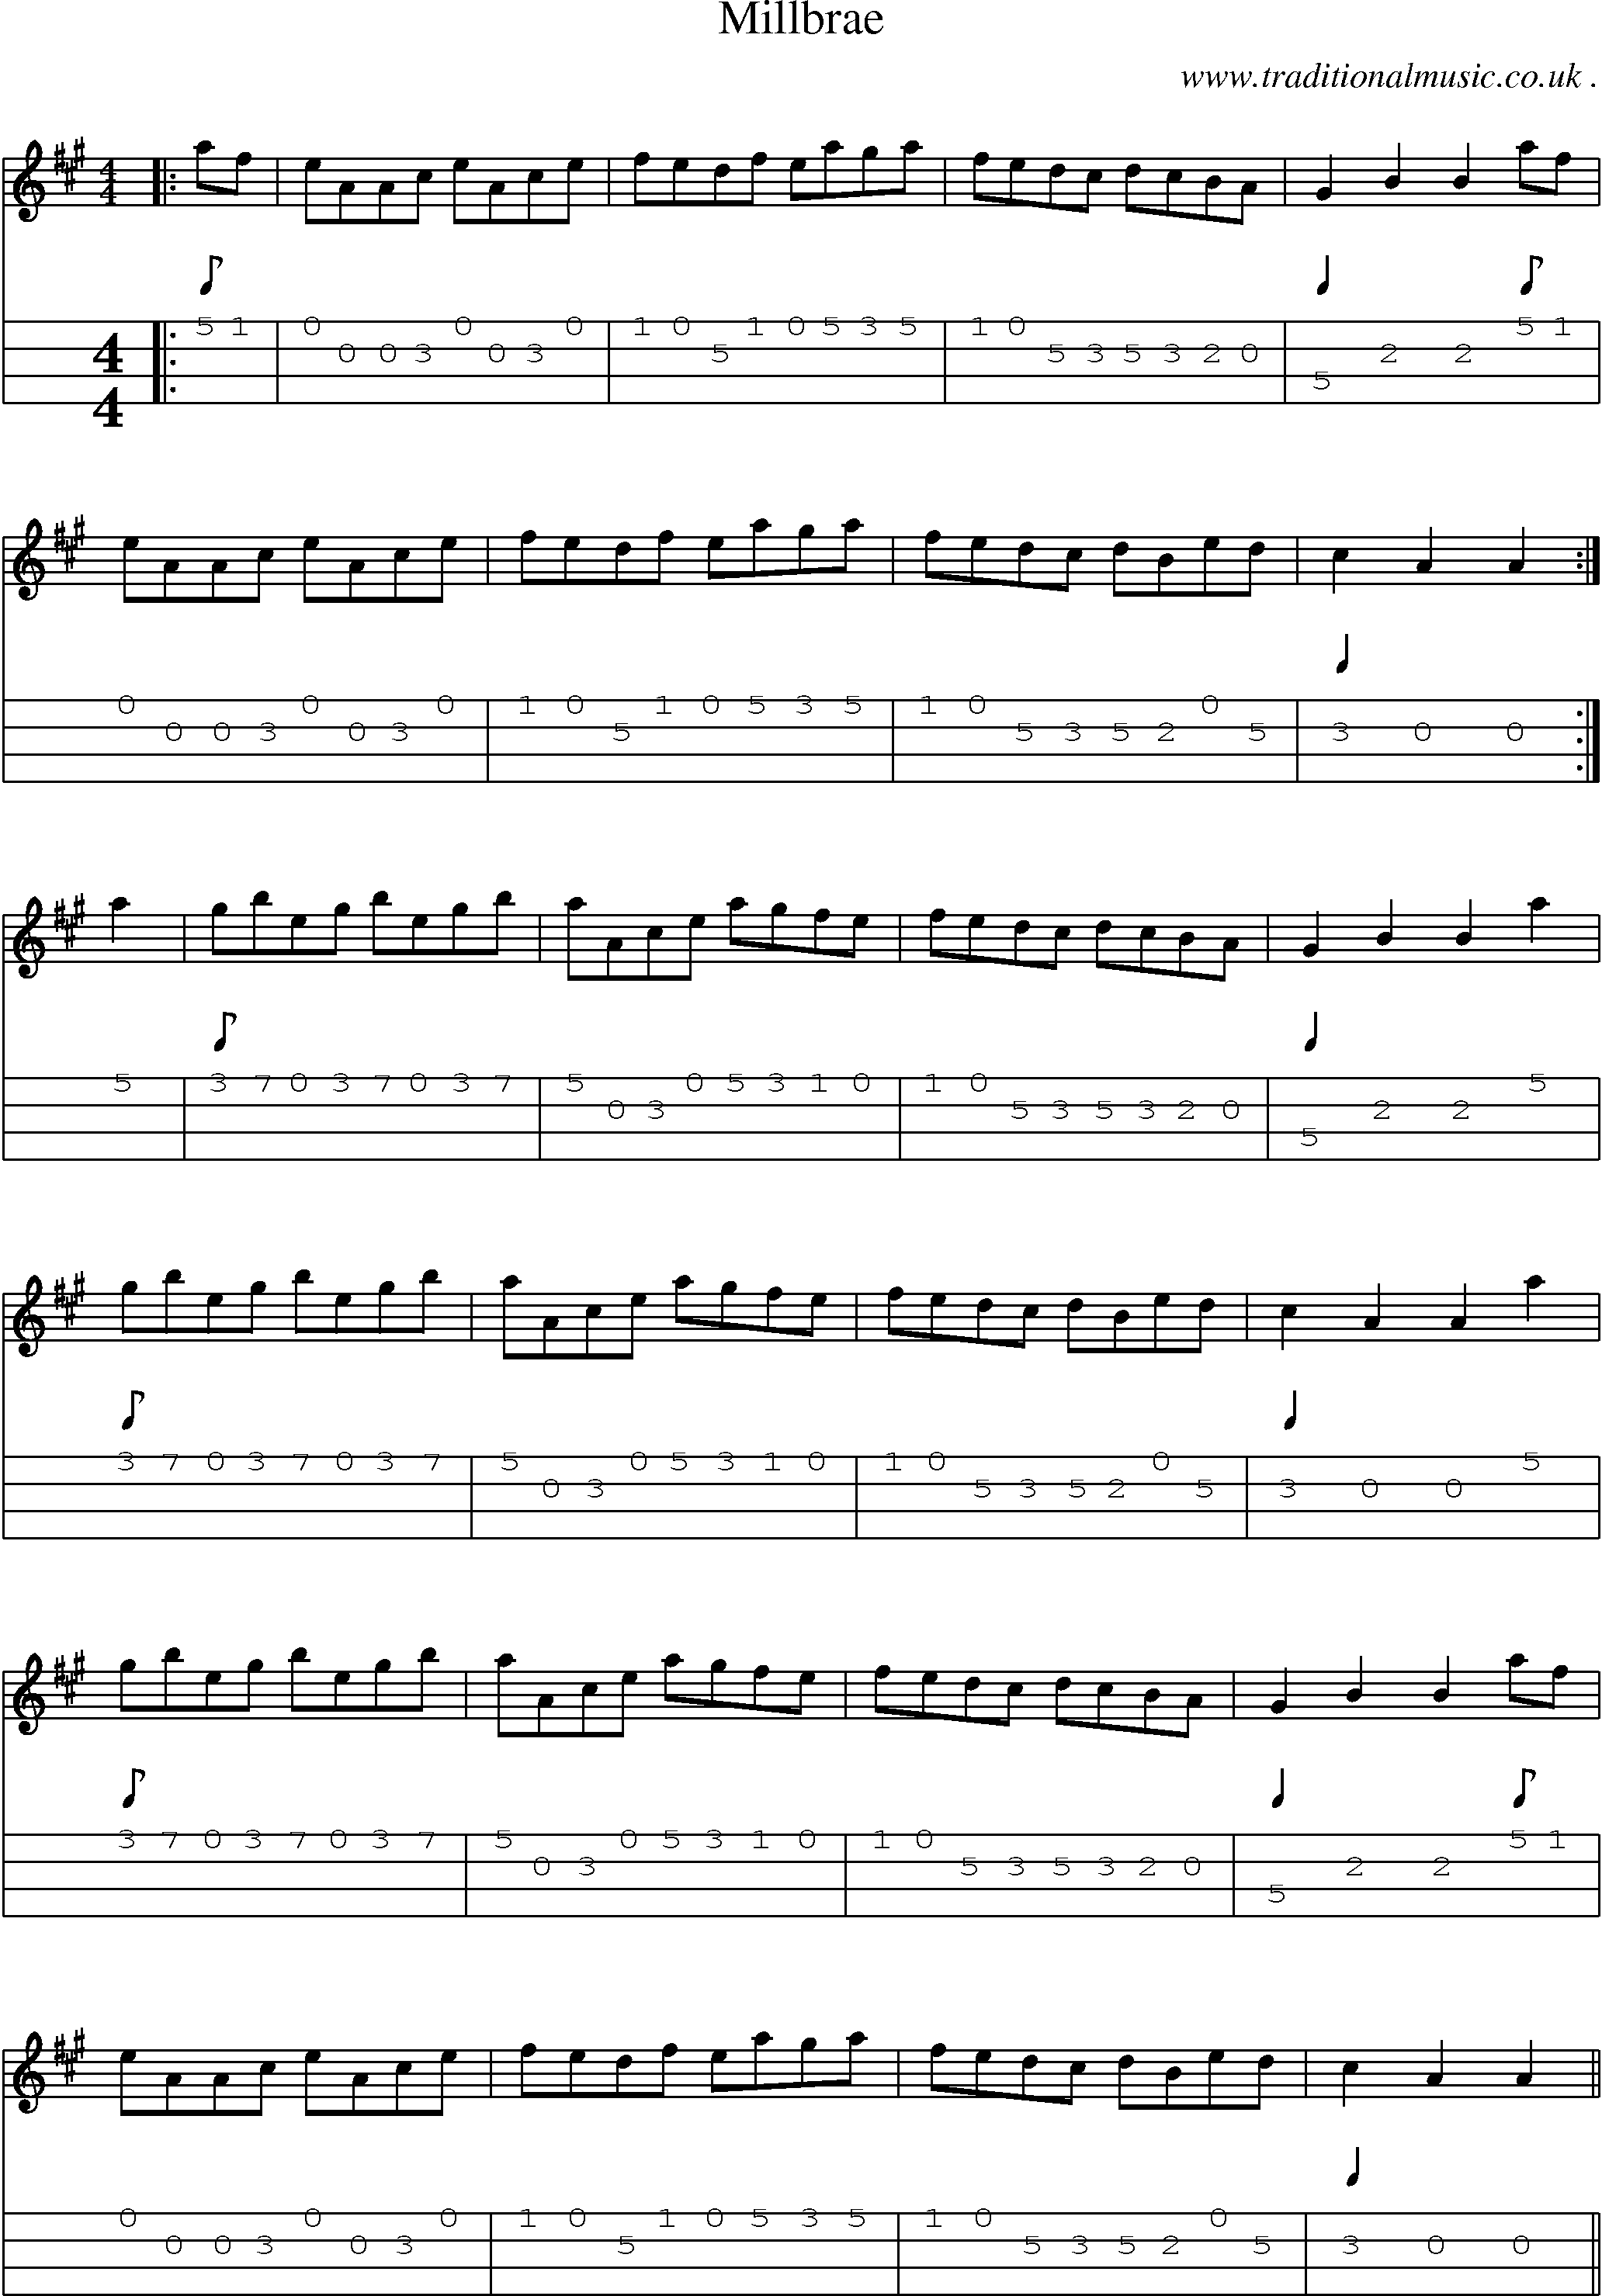 Sheet-Music and Mandolin Tabs for Millbrae